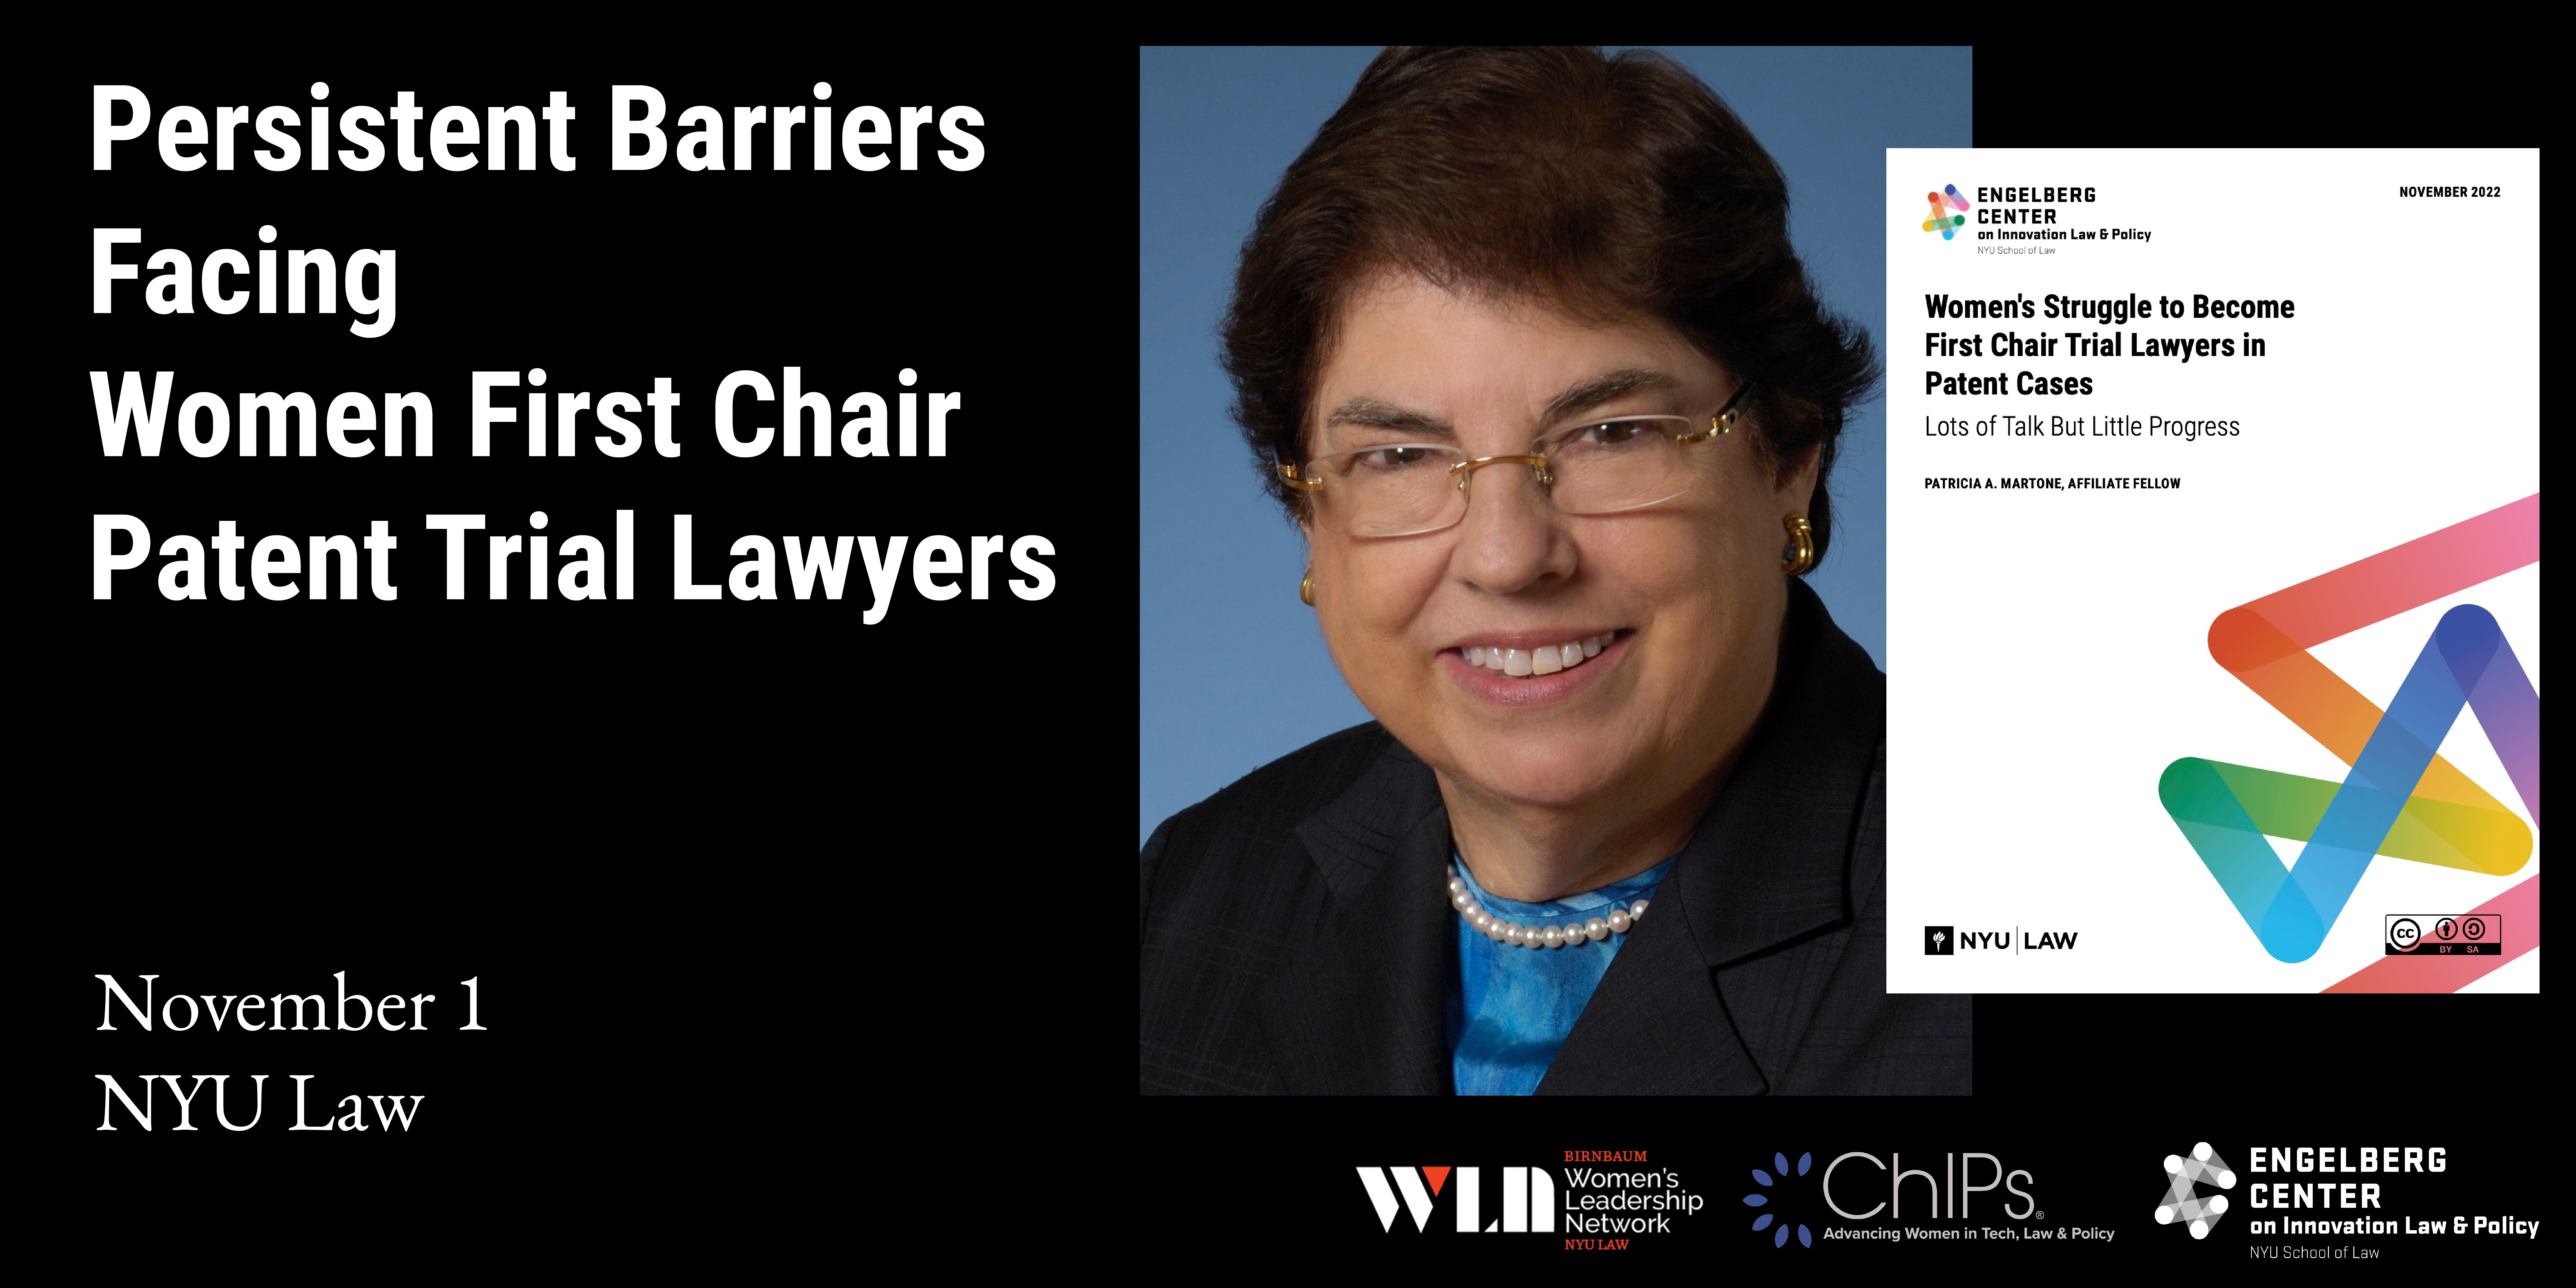 Event image for Persistent Barriers Facing Women First Chair Patent Trial Lawyers event